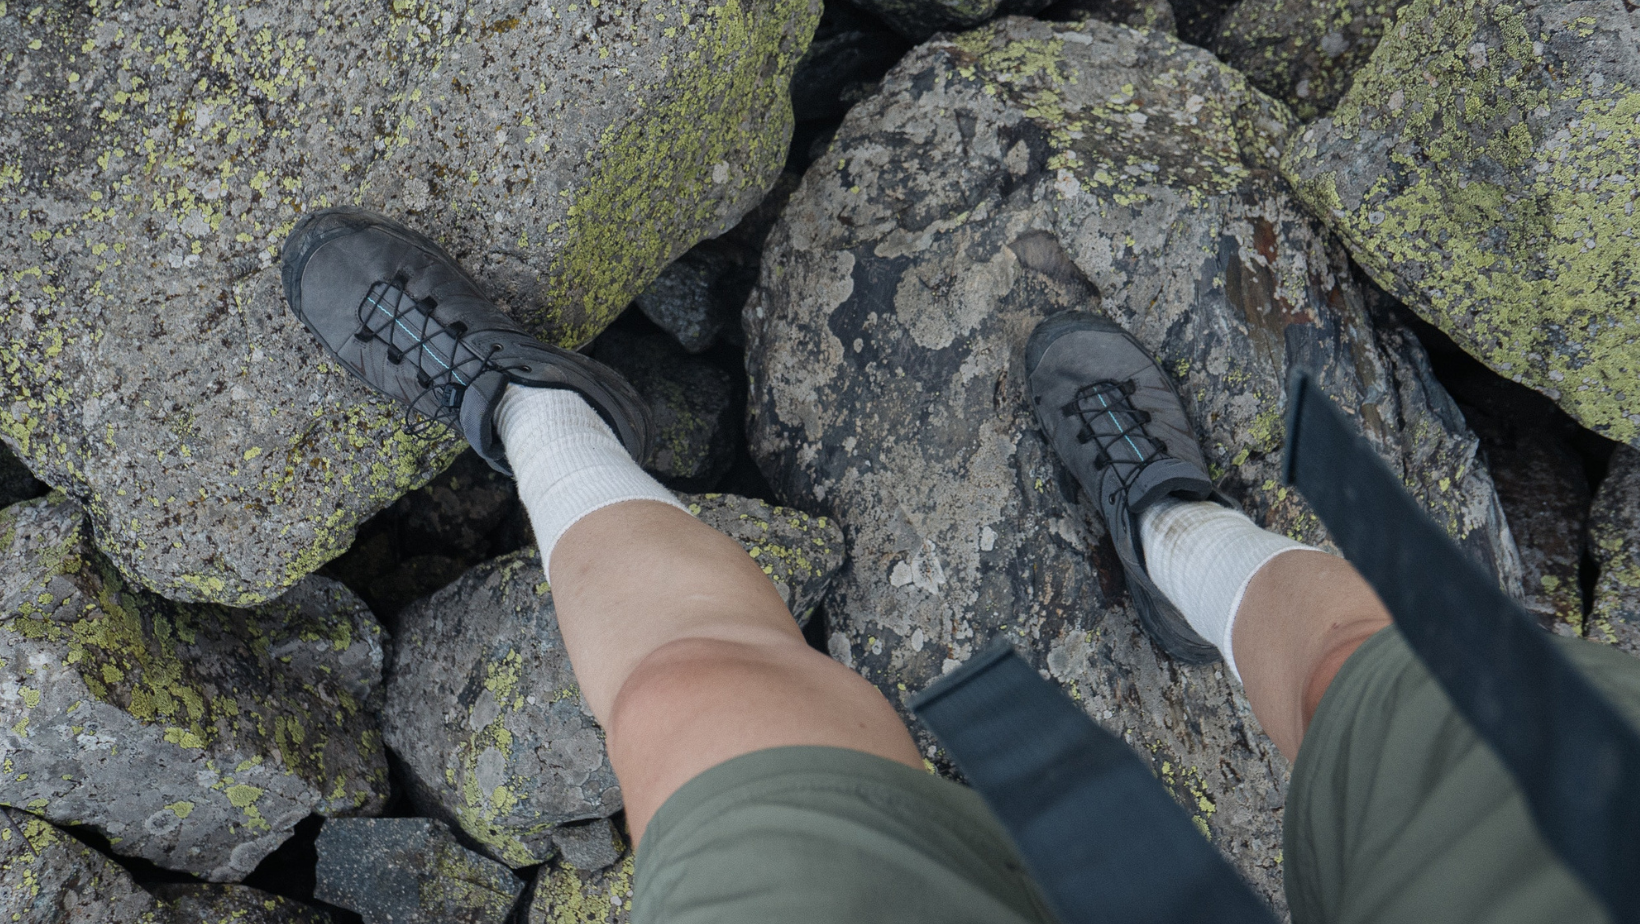 photo of a person wearing hiking shoes